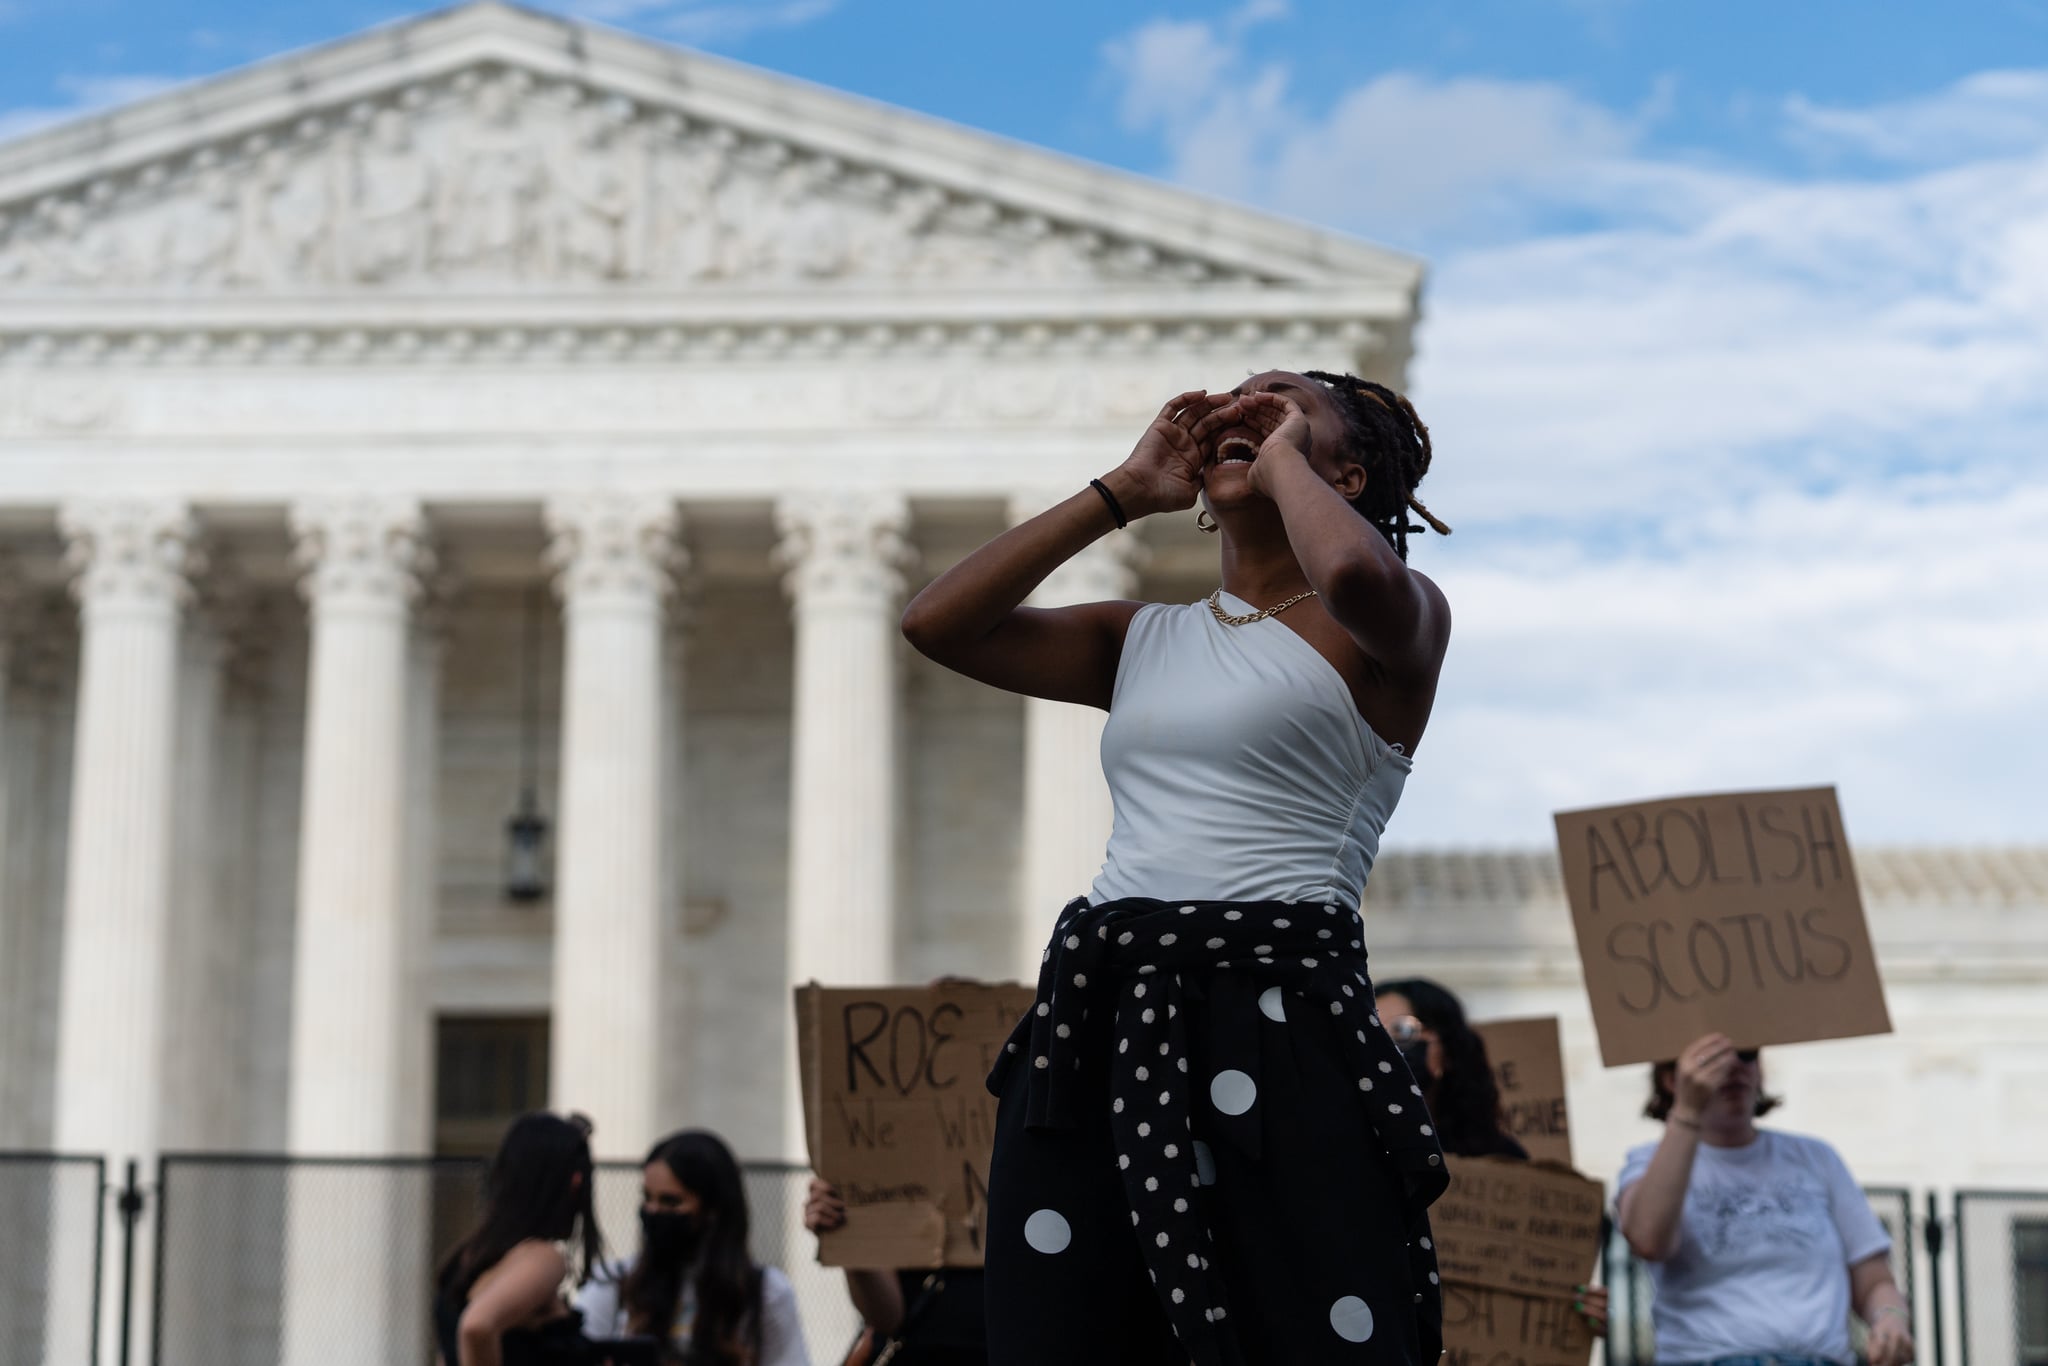 An abortion rights demonstrator leads a chant outside the US Supreme Court in Washington, D.C., US, on Monday, June 27, 2022. A CBS News poll suggested that a majority of Americans disapprove of the Supreme Court's decision overturning the constitutional right to an abortion, which is inflaming a partisan divide on display in comments by senior lawmakers. Photographer: Eric Lee/Bloomberg via Getty Images